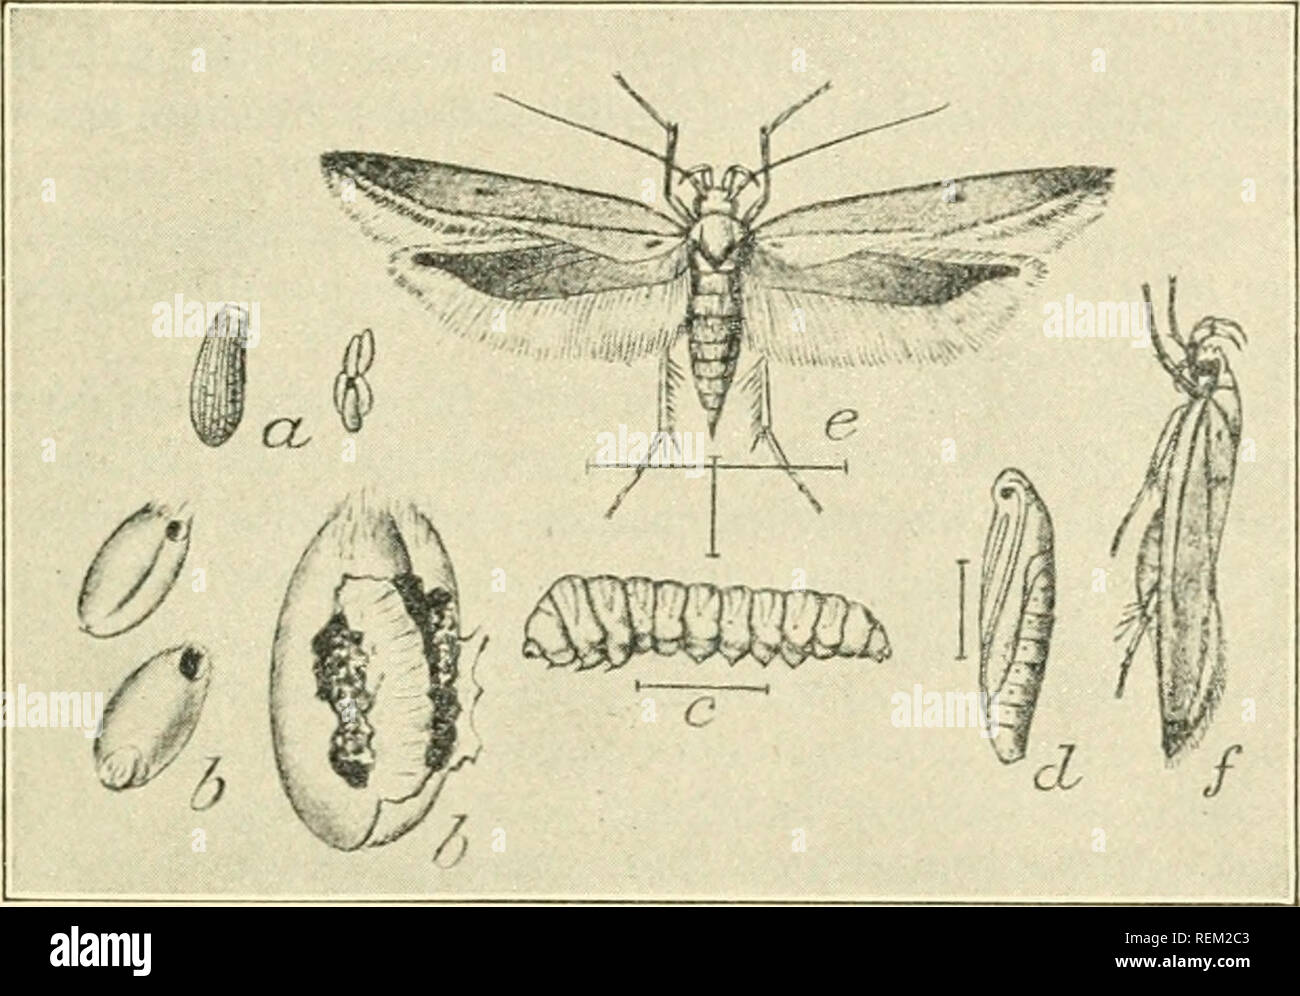 . Circular. Insect pests; Insect pests. Sitotroga cerealella (fig. 3), in southern Illinois, where Messrs. Halliday Brothers, of Cairo, growers and shippers of wheat, were at that time experiencing considerable trouble from the ravages of this grain moth, not only in their grain elevators but also in barges loaded with wheat to be shipped by river to New Orleans and thence exported by steamer. It was during these investigations that this mite was discovered attacking the larvae of the grain moth. As the original publication containing the author's observations is becoming more and more difficu Stock Photo